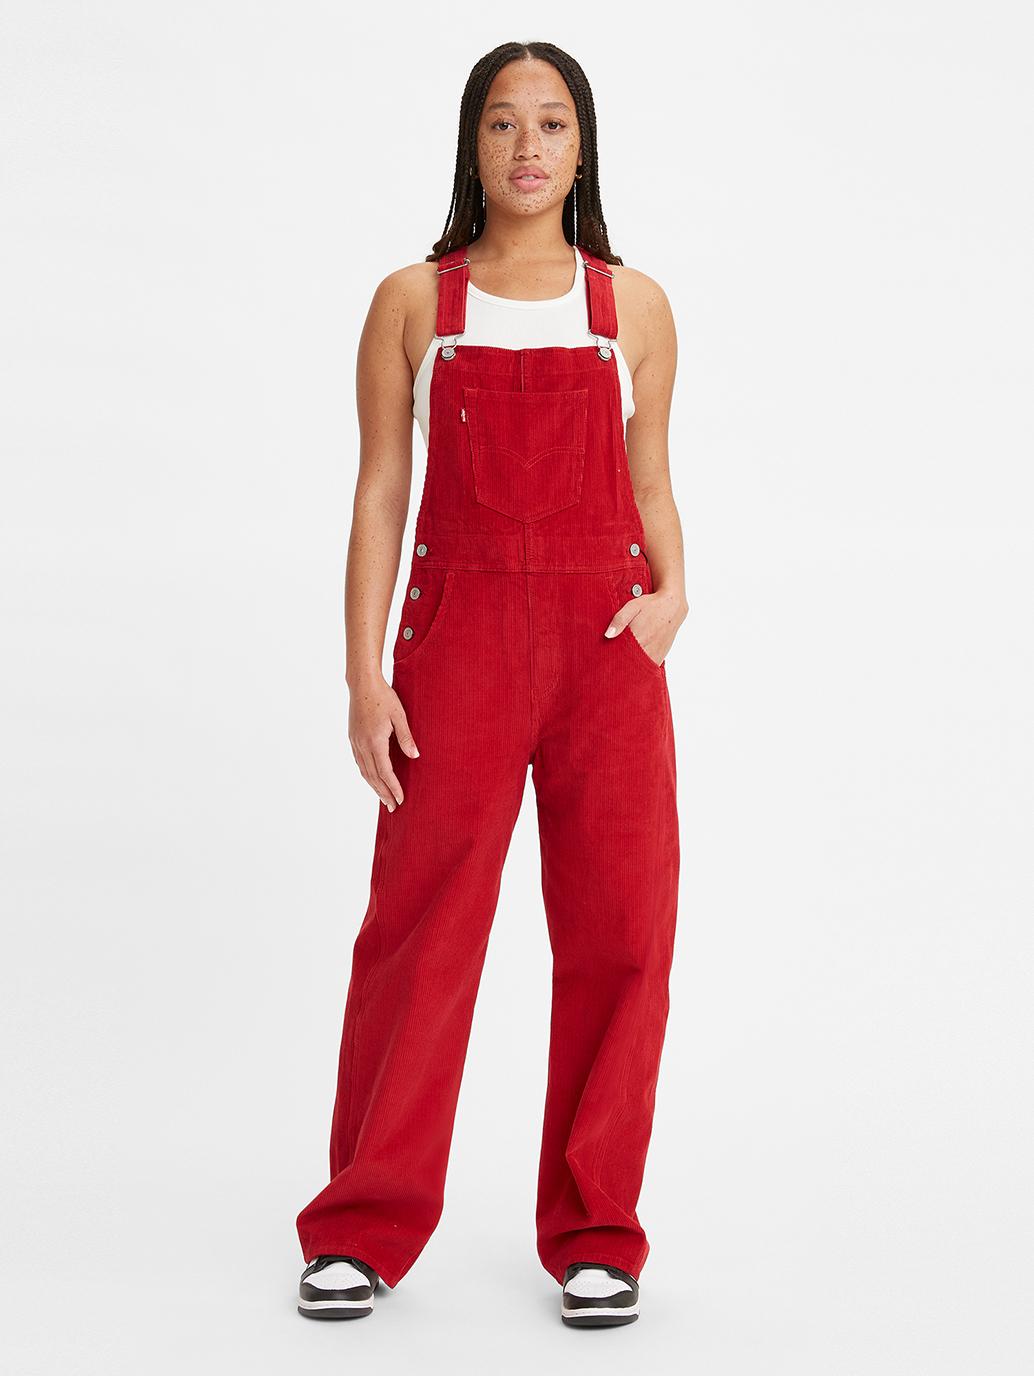 Levi's® Hong Kong x verdy girls dont cry corduroy womens overalls A22500000 10 ModelFront